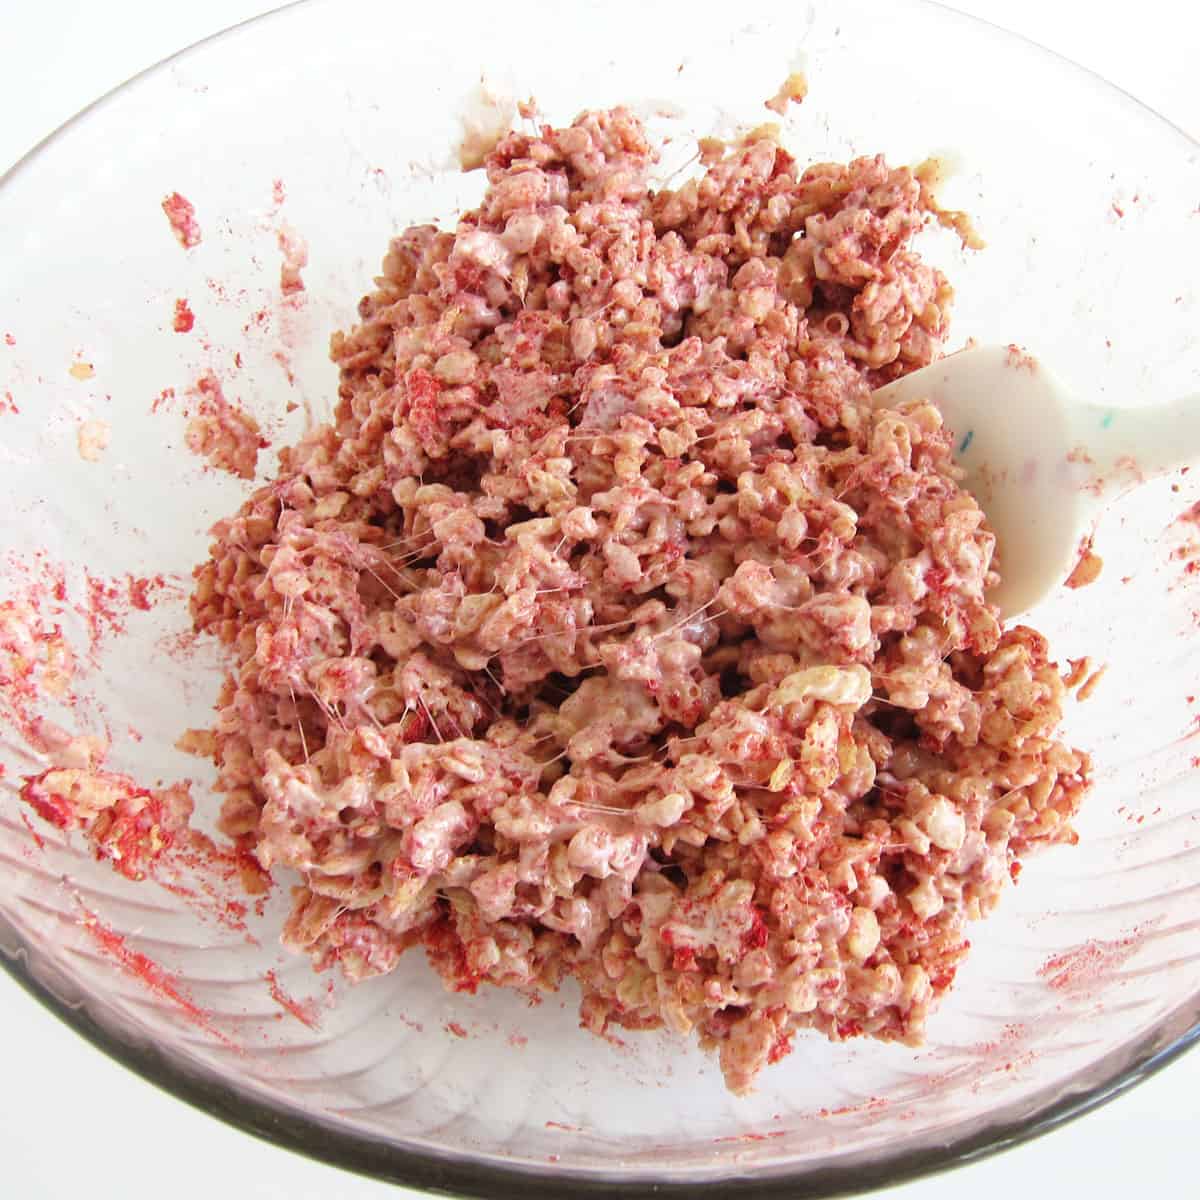 mixing strawberry Rice Krispie treats in a large mixing bowl